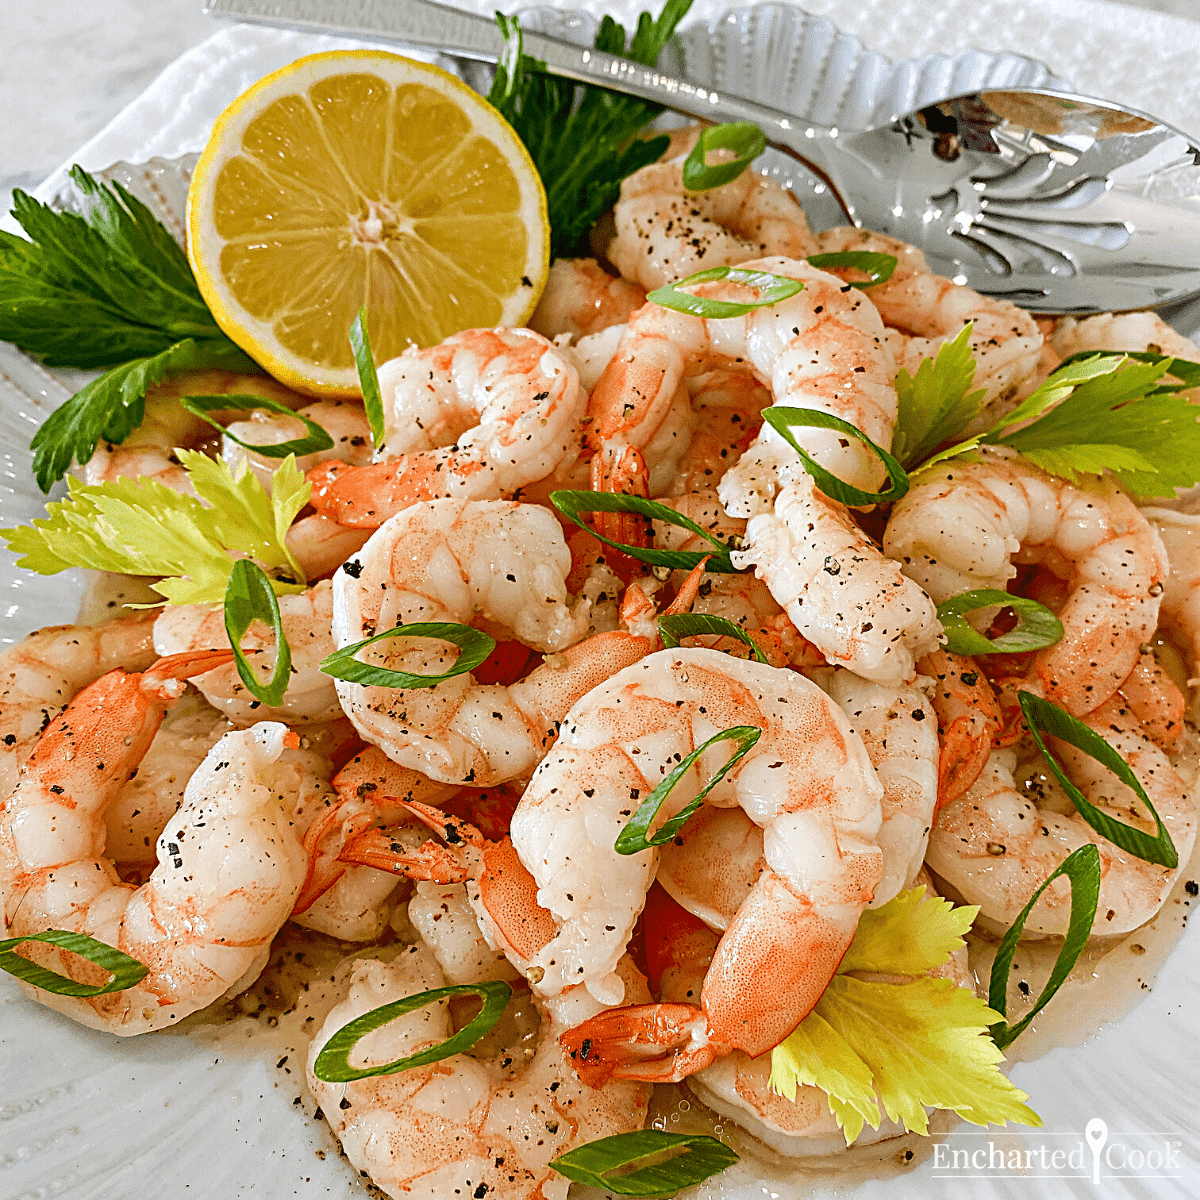 Square image of a plate of shrimp garnished with green onions, celery leaves, and a lemon half.